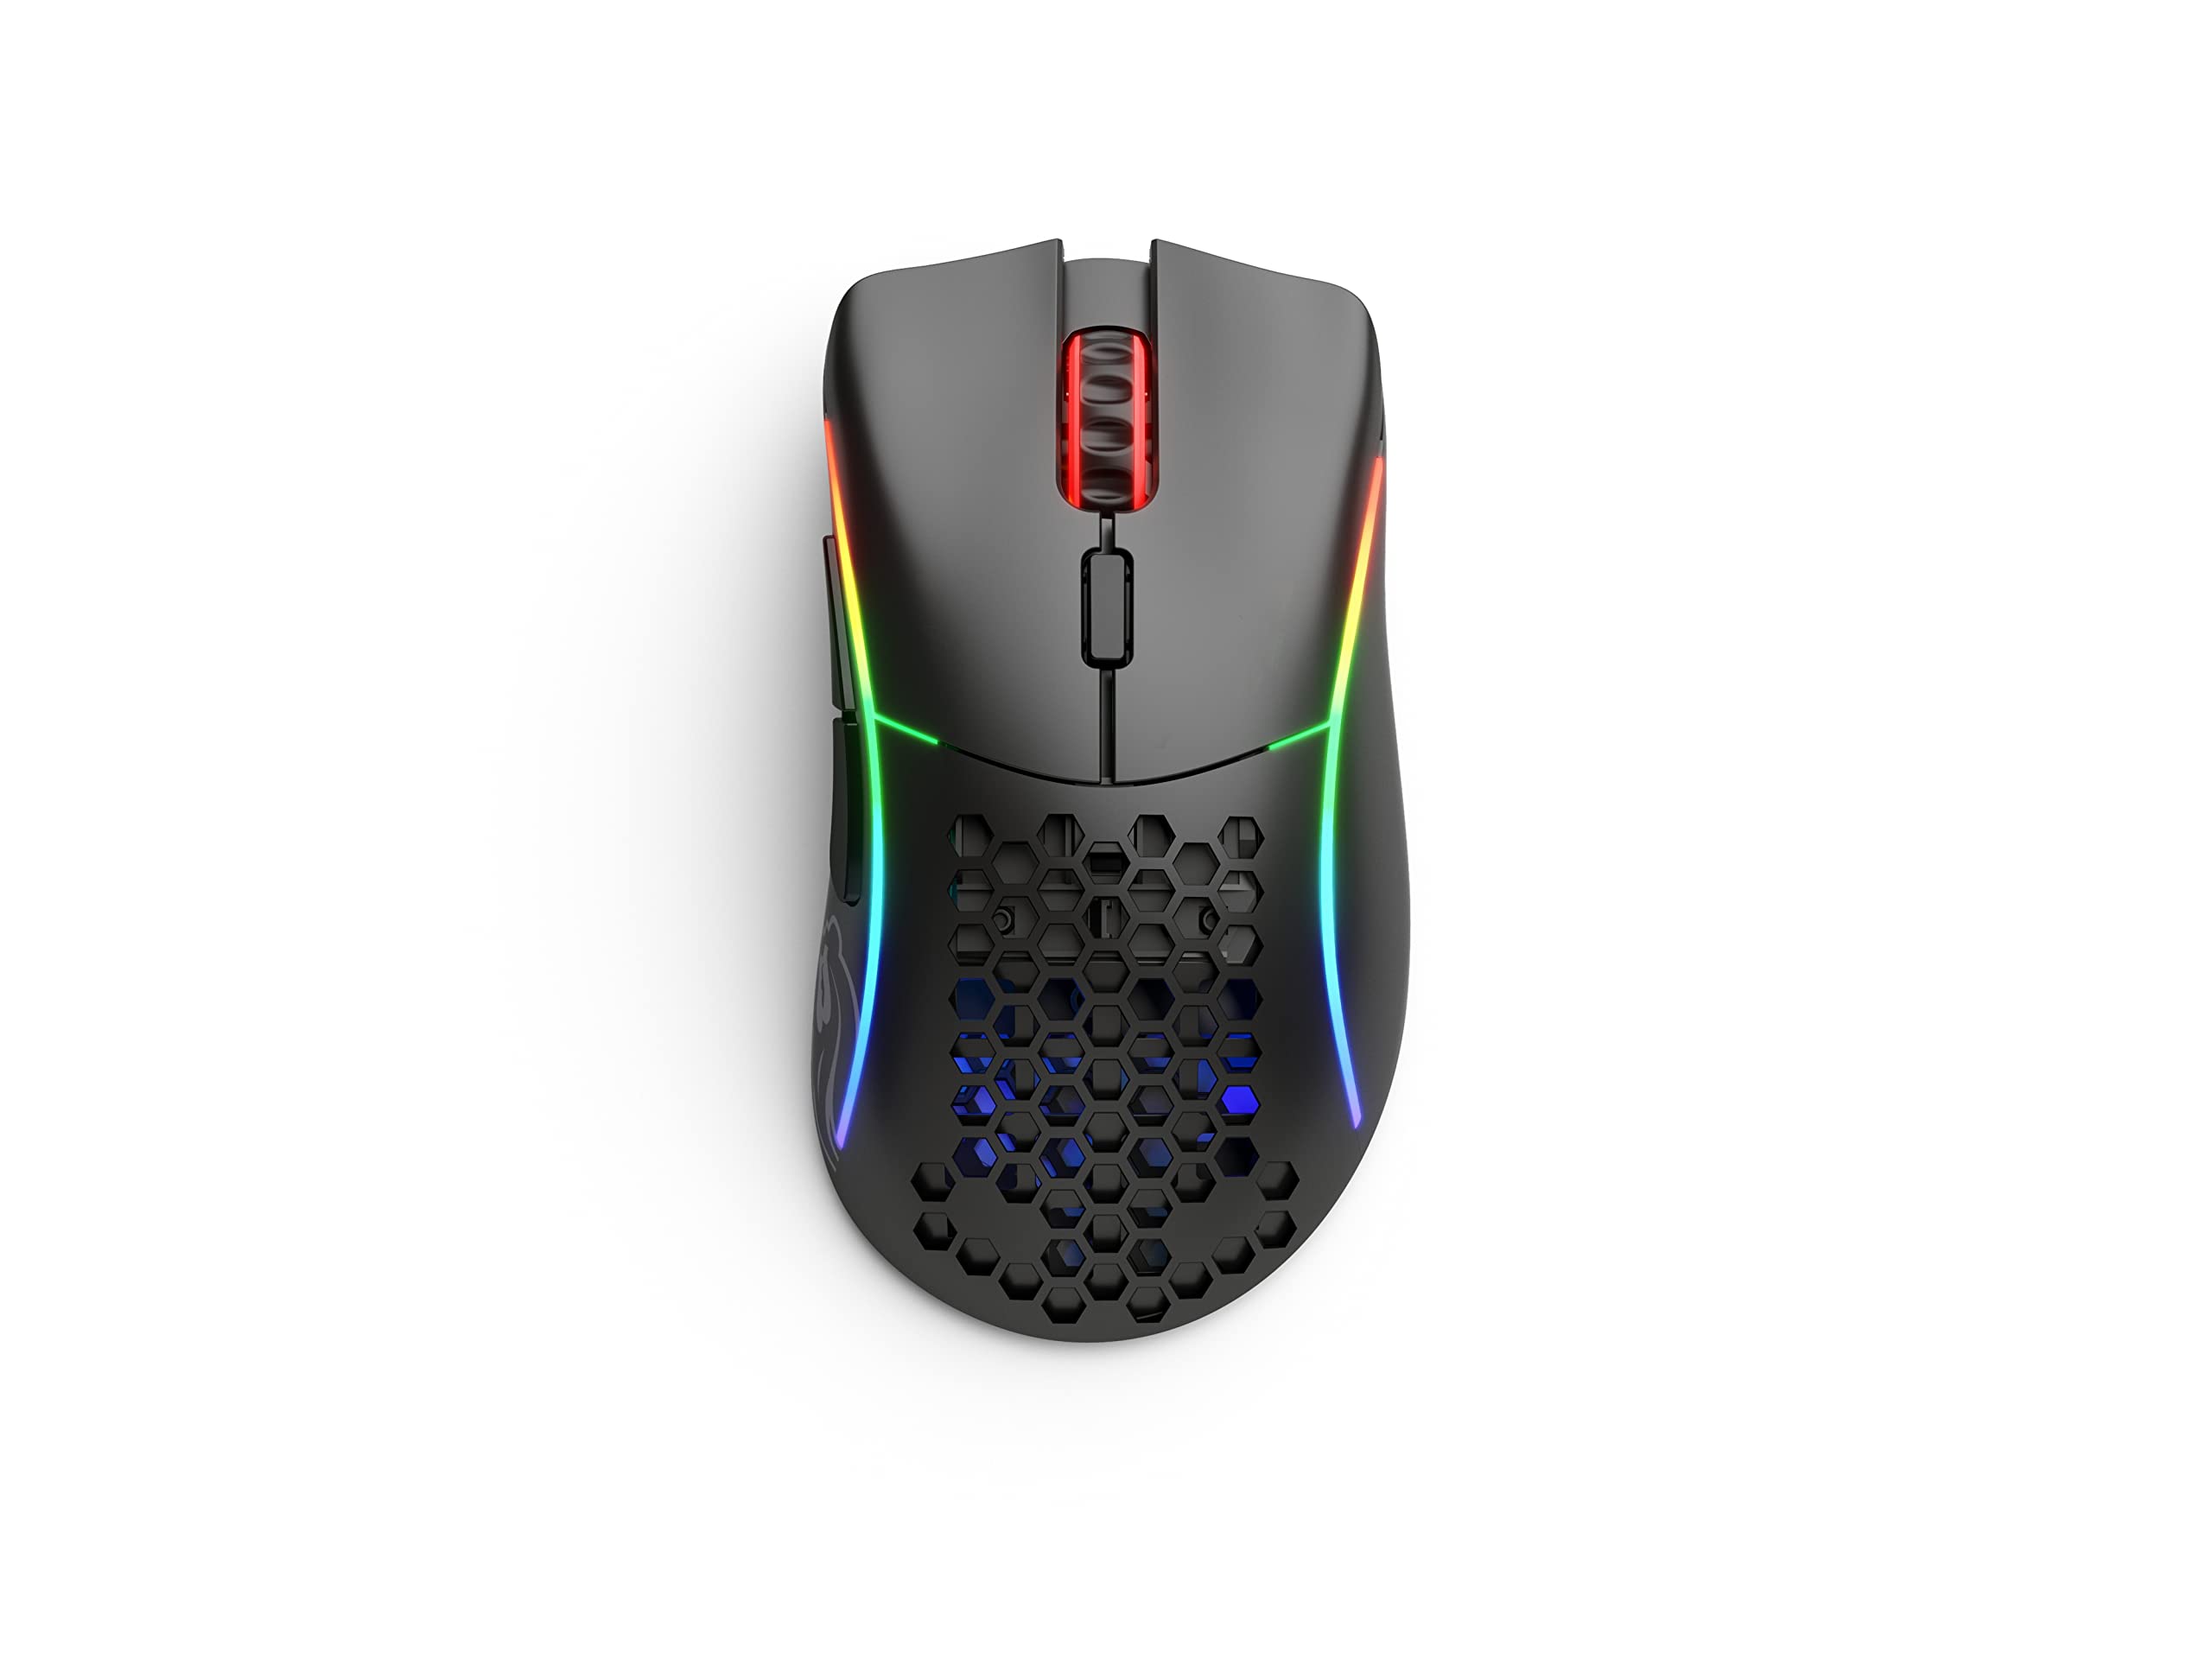 Glorious Model D Wireless Gaming Mouse - 69g Superlight, Lag Free 2.4Ghz Wireless, Up to 71 Hour Battery, RGB, BAMF Sensor, Ergonomic, 6 Buttons - Matte Black